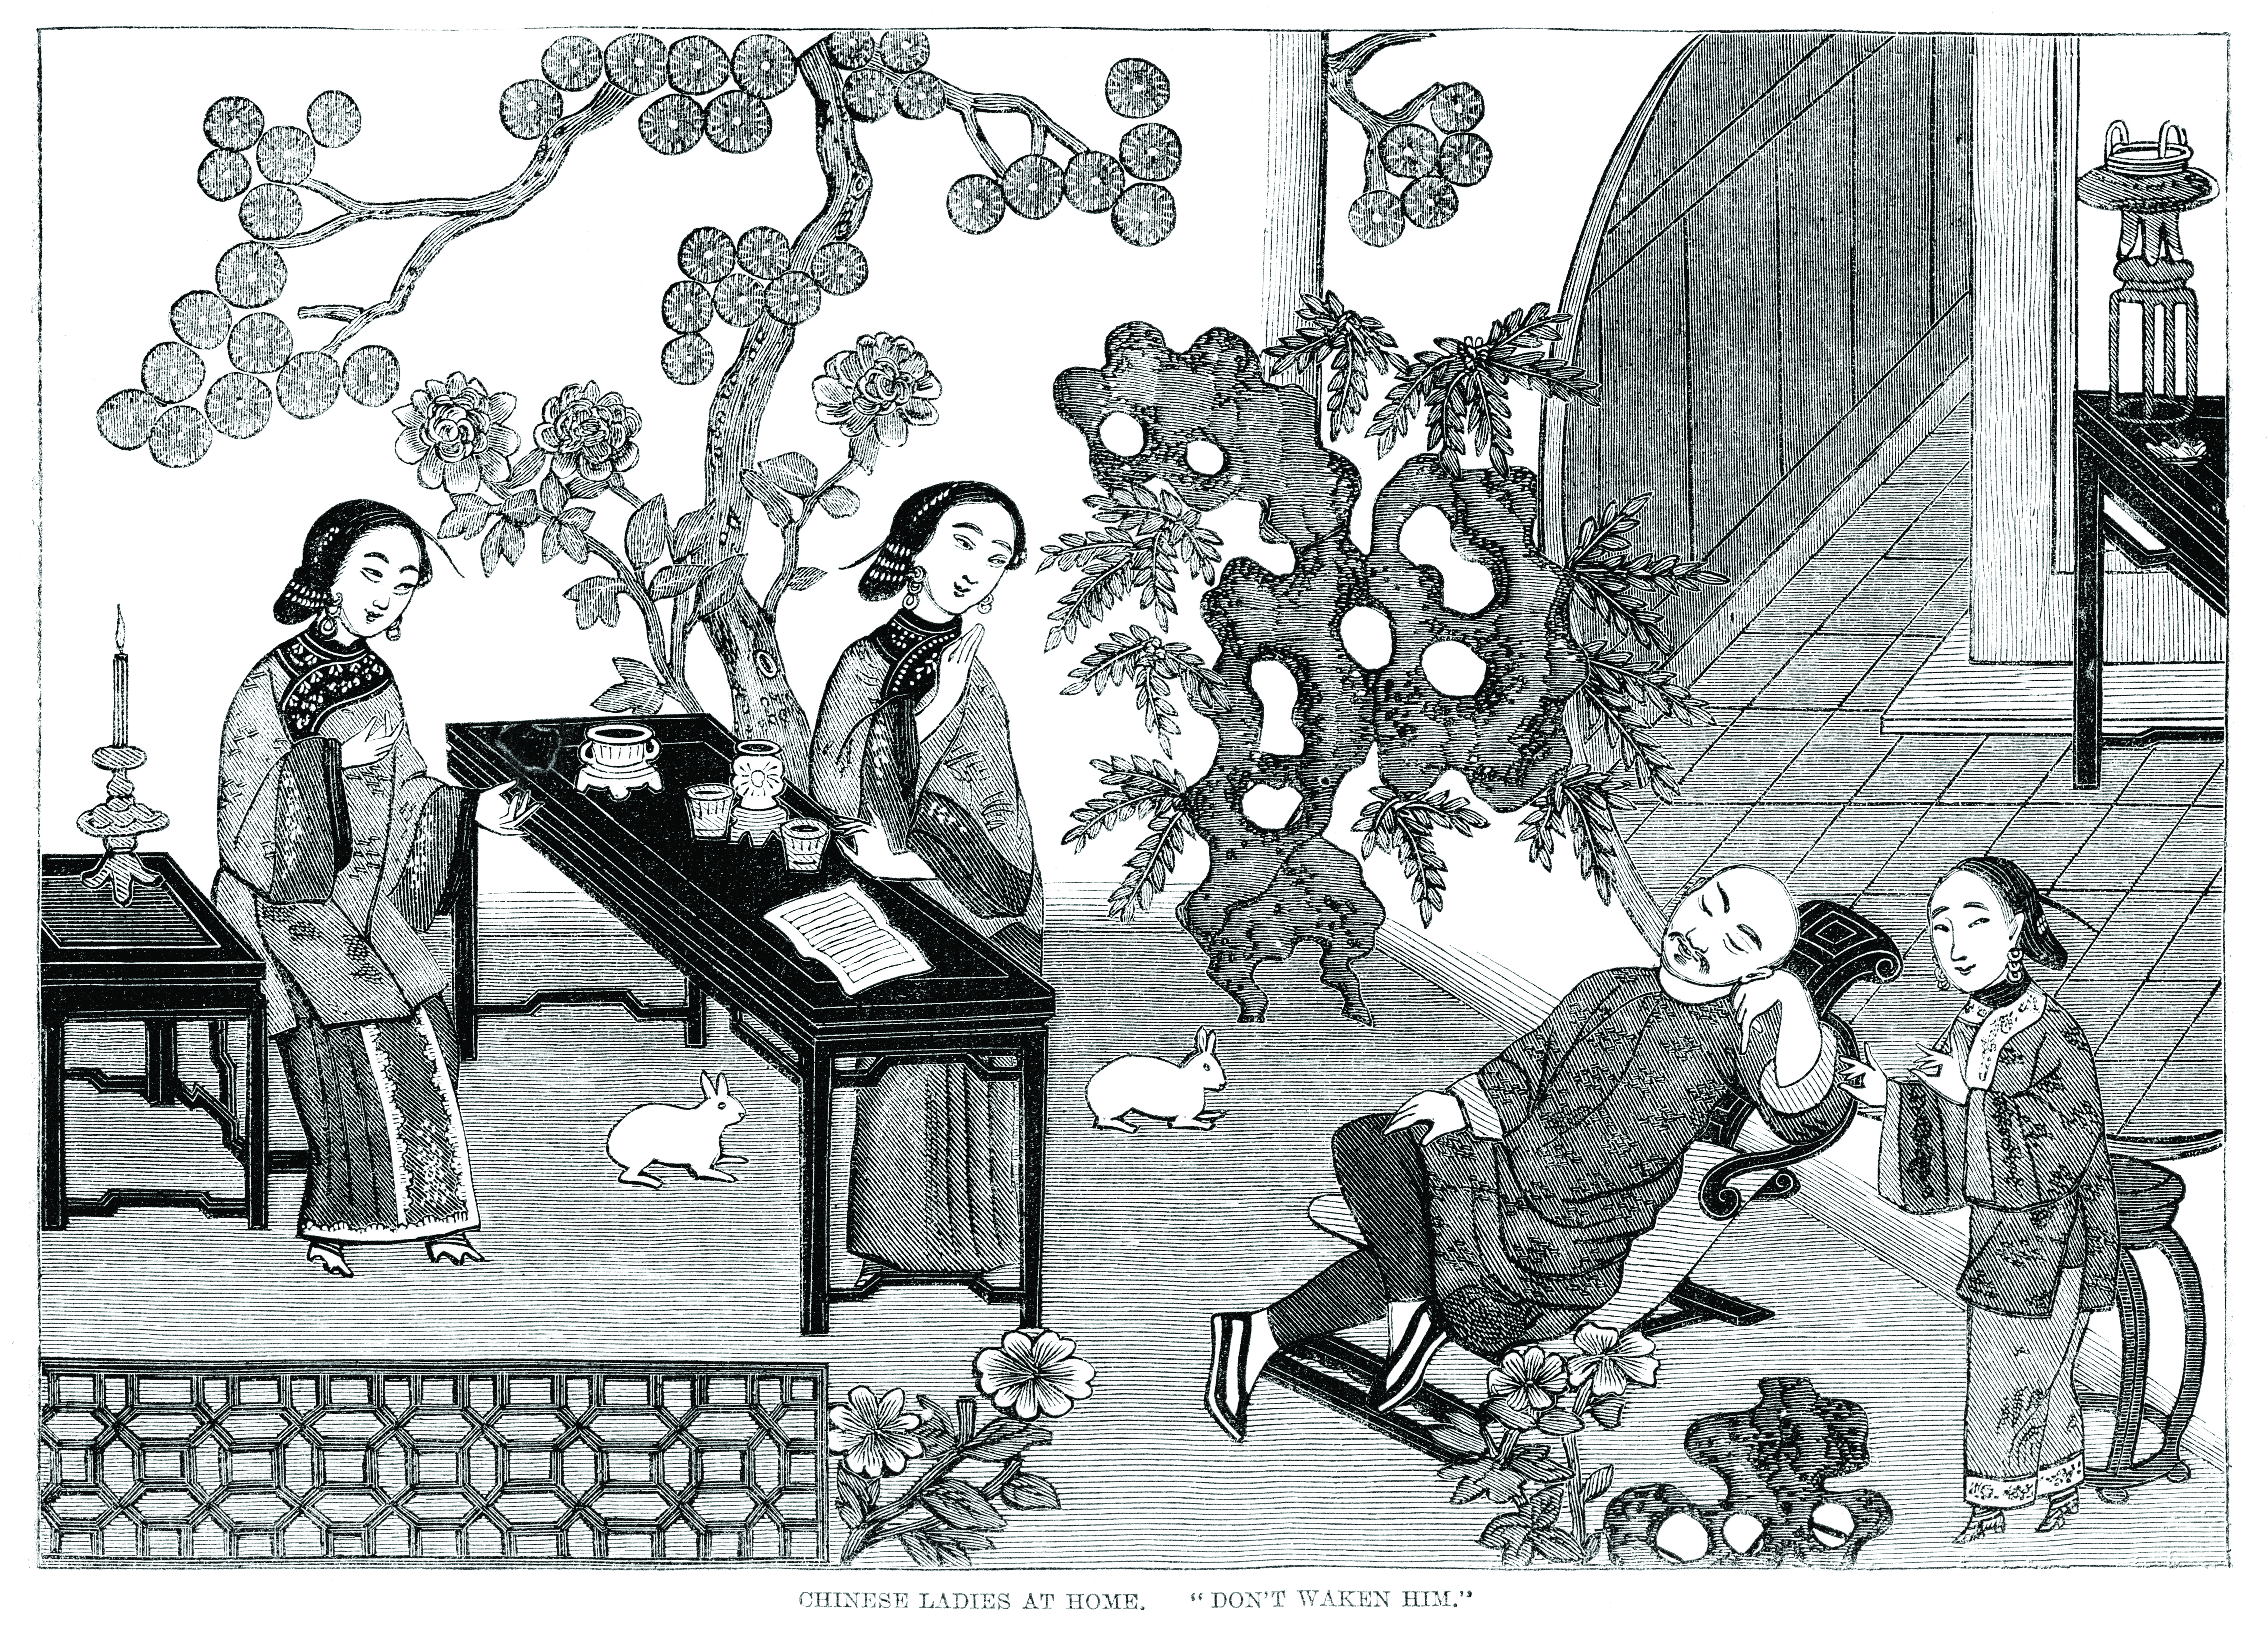 Women in ancient and imperial China generally lived hard lives.